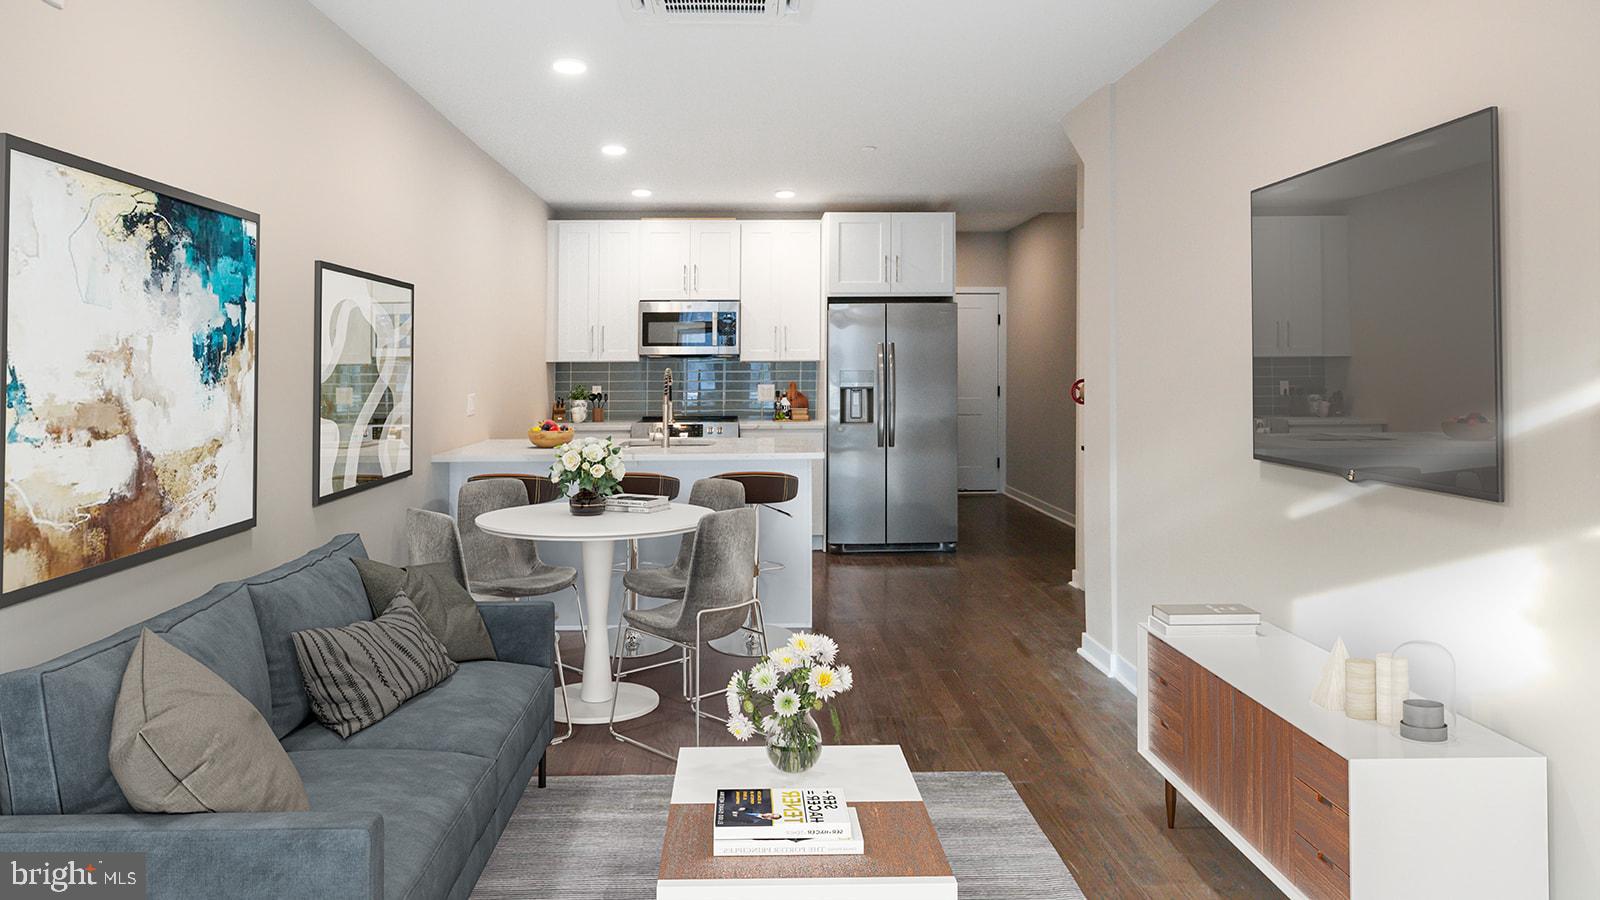 a living room with stainless steel appliances furniture and a view of kitchen